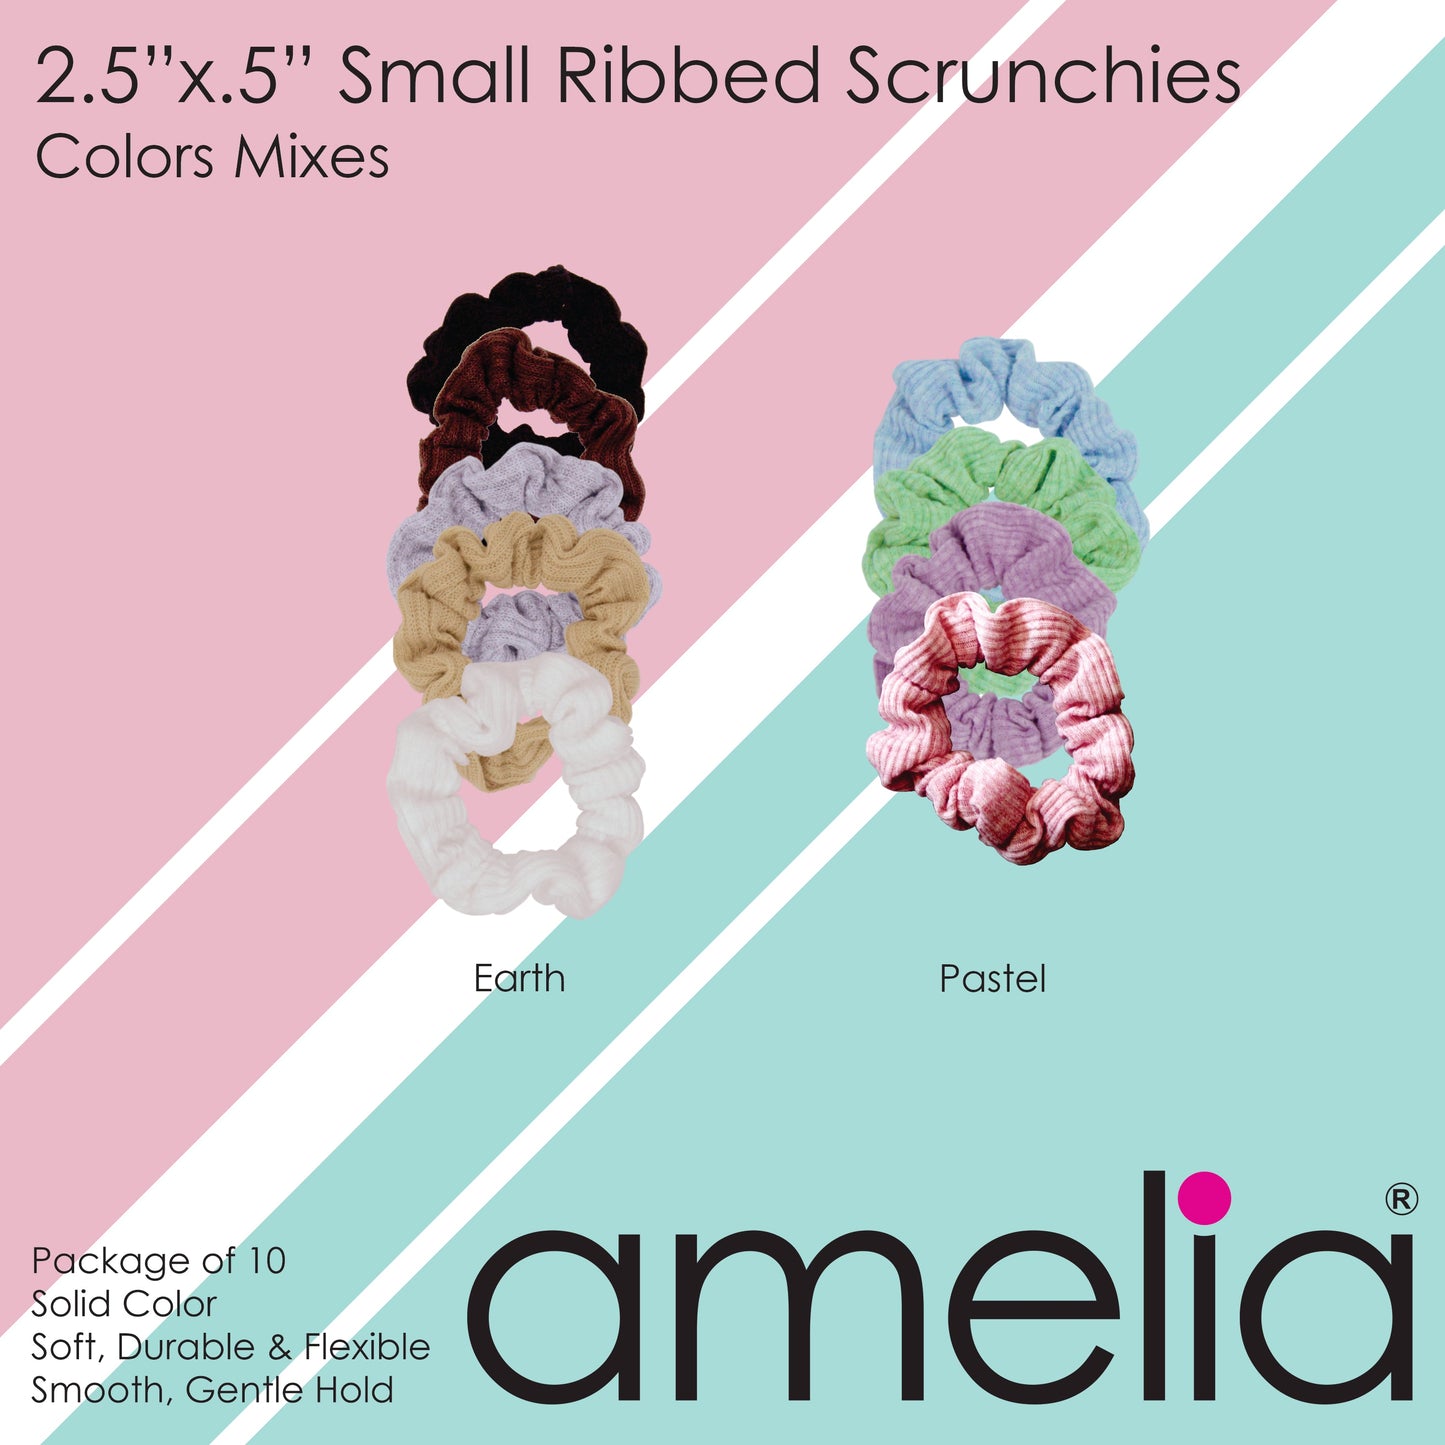 Amelia Beauty, Medium White Ribbed Scrunchies, 2.5in Diameter, Gentle on Hair, Strong Hold, No Snag, No Dents or Creases. 10 Pack